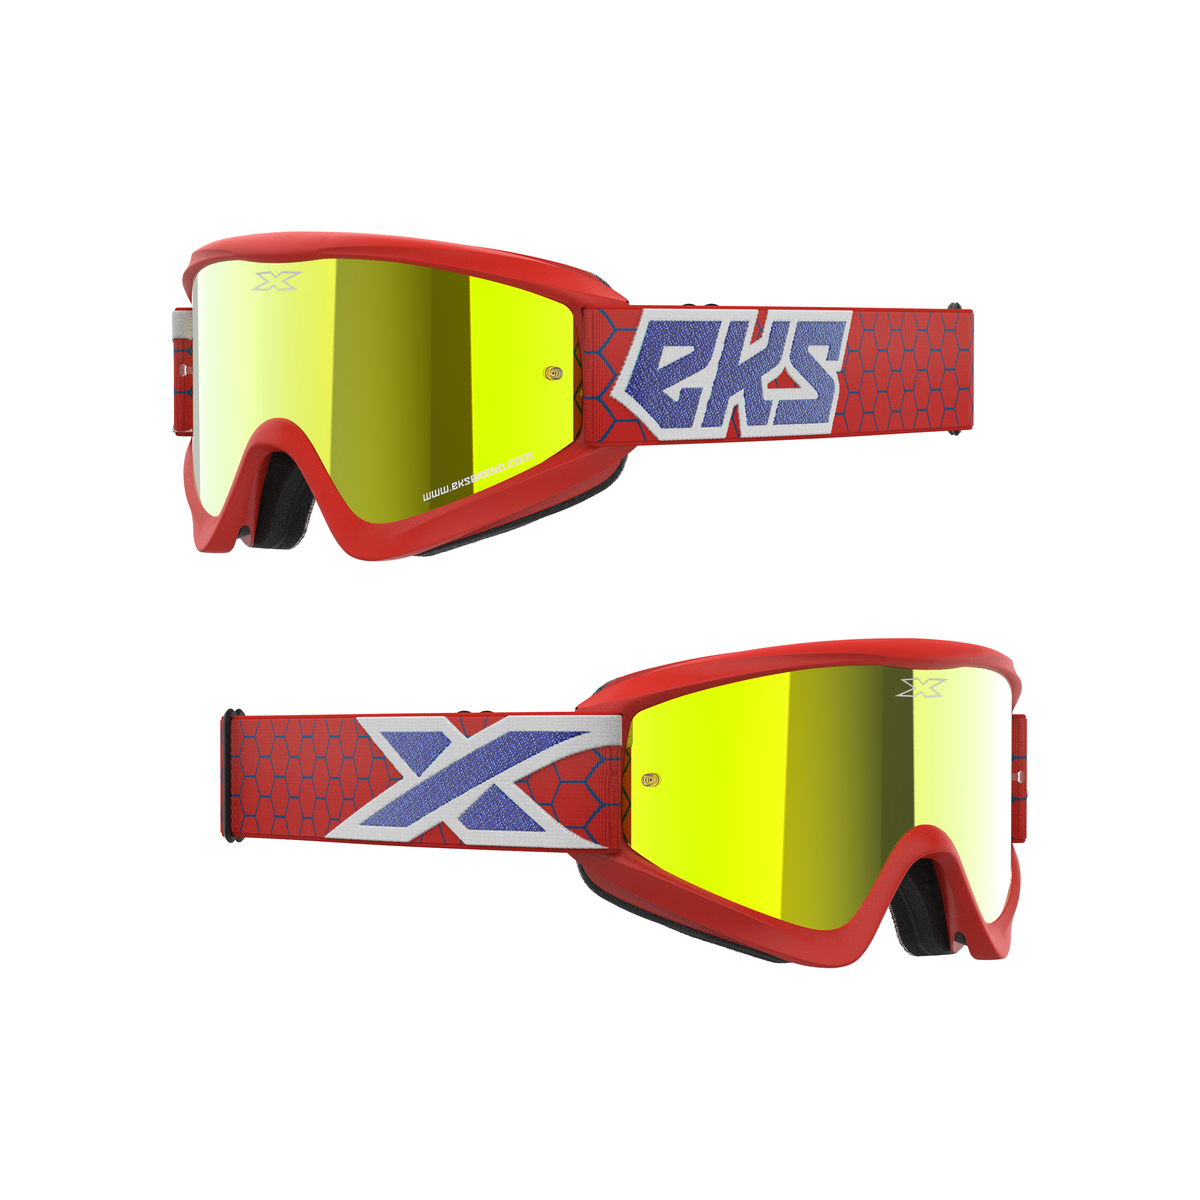 GOX Flat-Out Mirror Goggle Red, White, Blue Metallic - Gold Mirror Lens